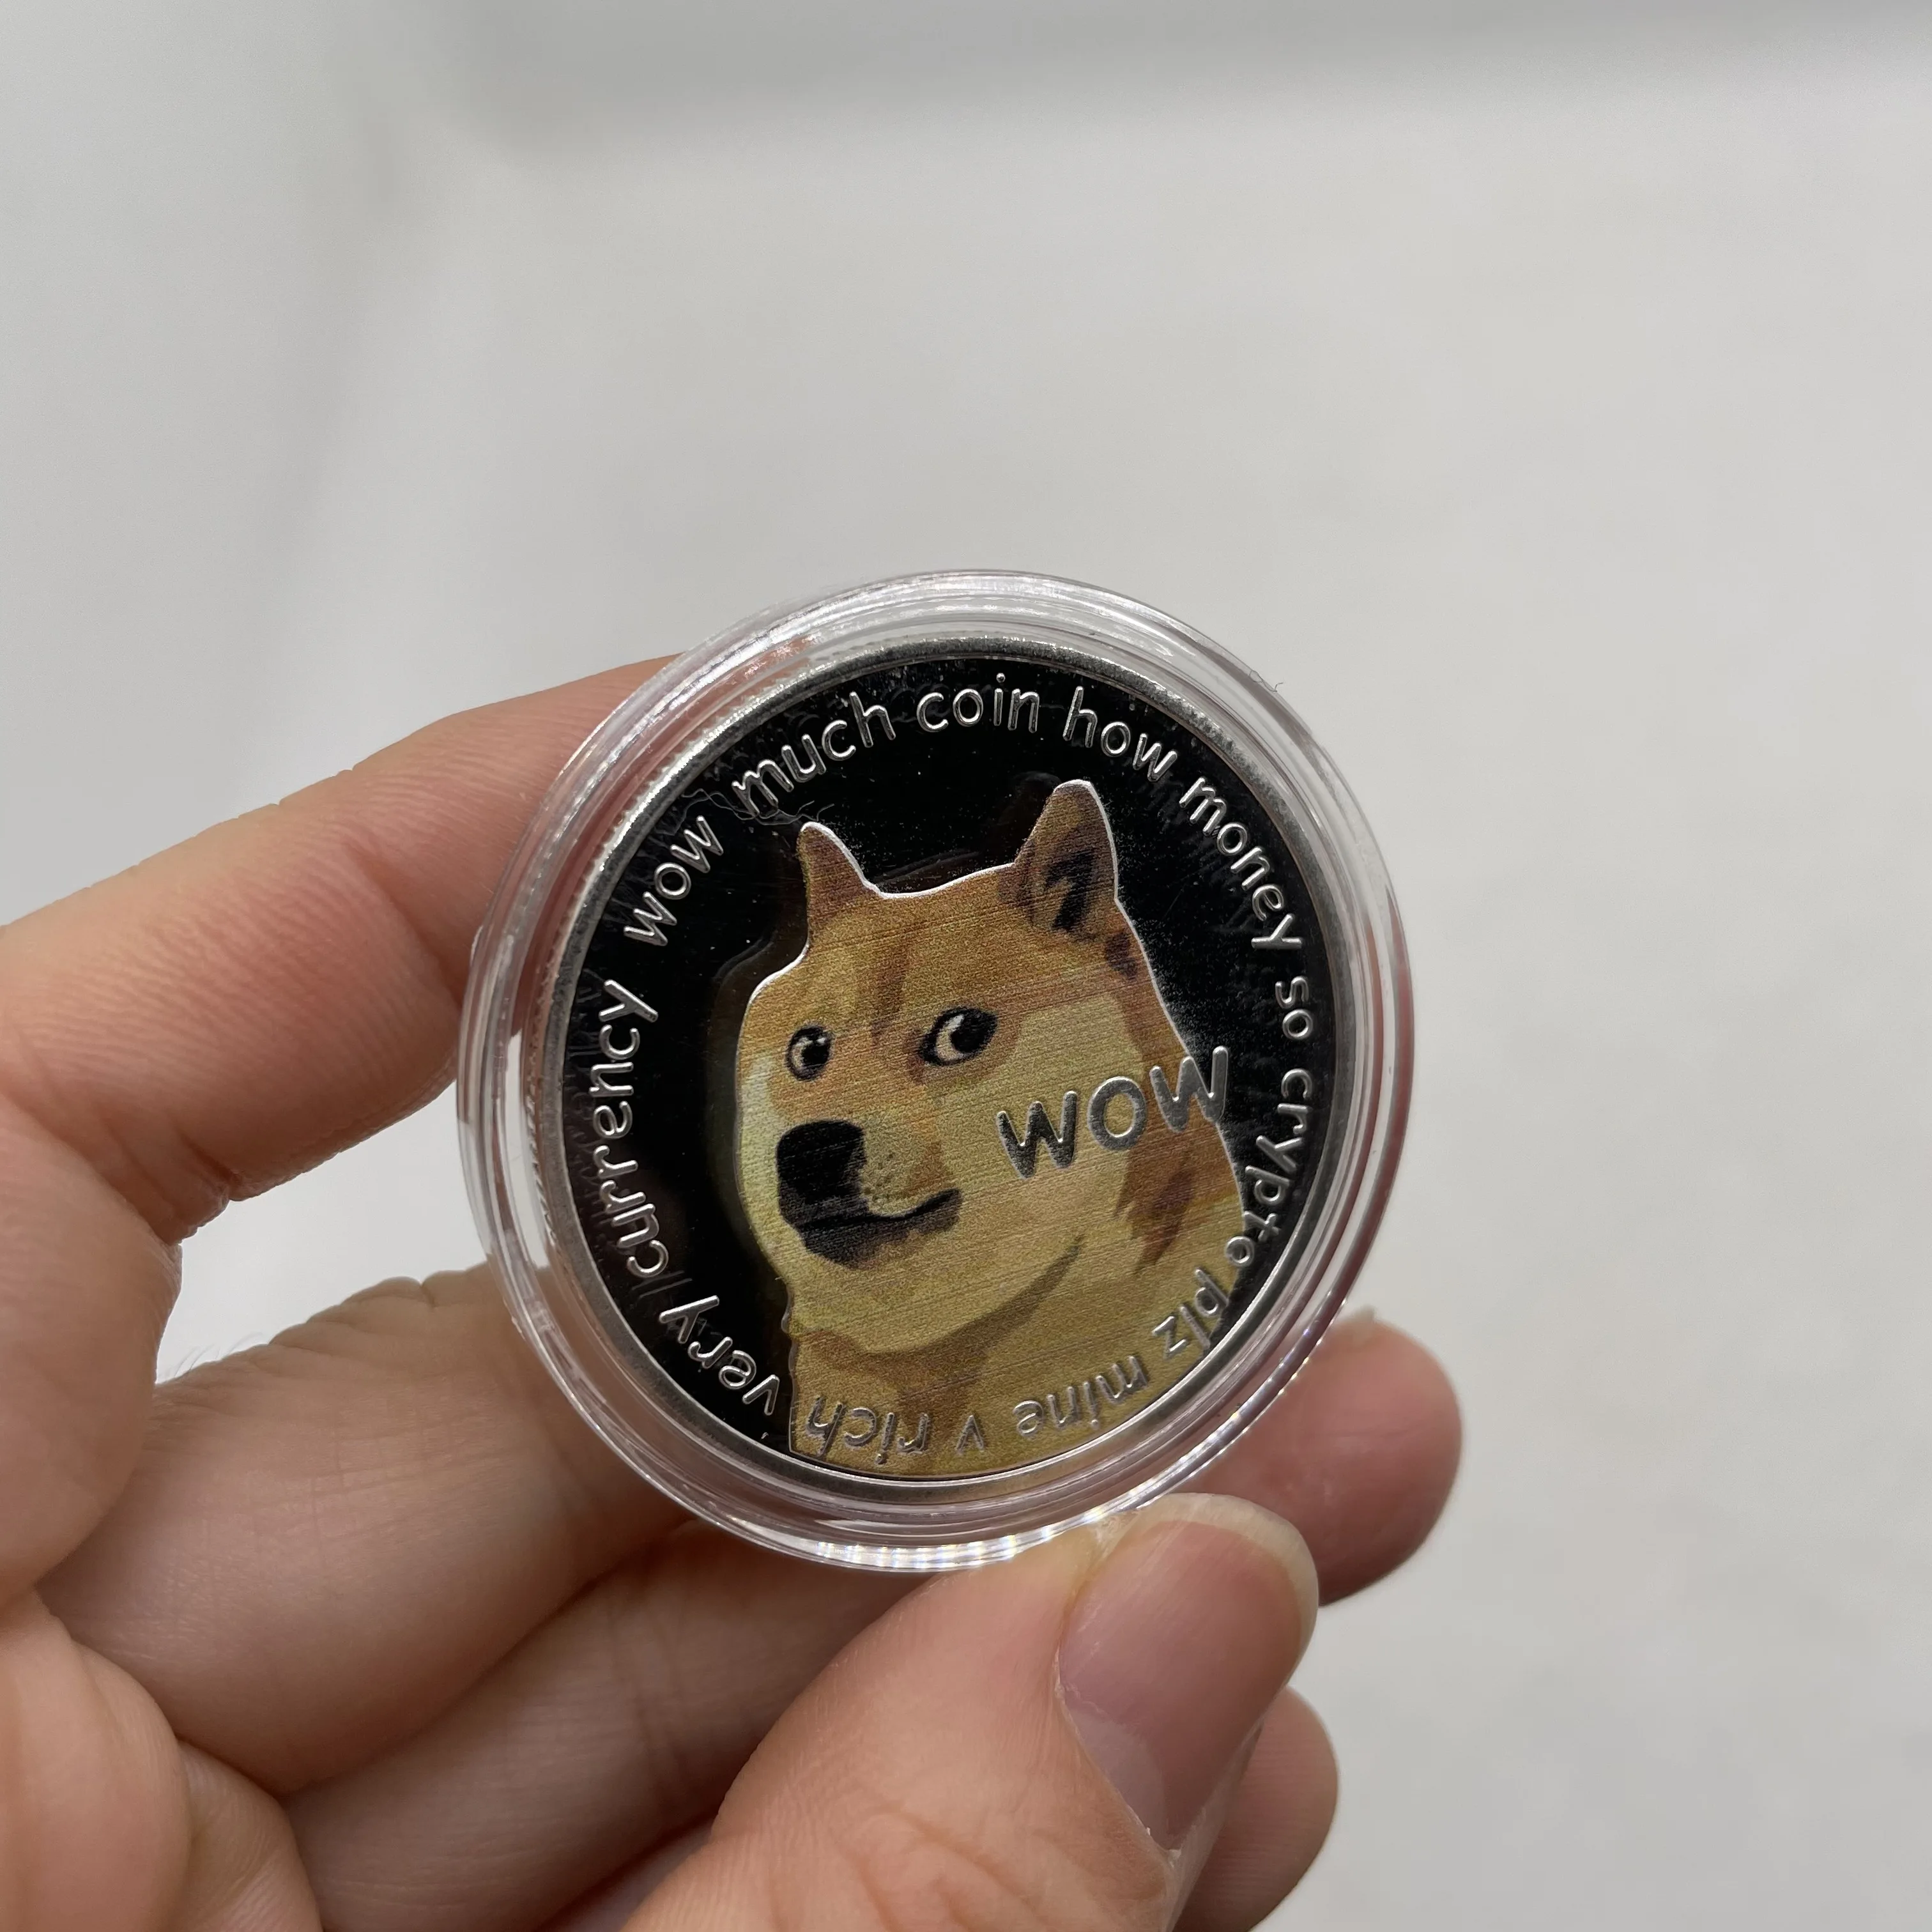 Gold, Silver and Copper Plated ForFine Dogecoin Coin 3 PCS Commemorative Coins 2021 Dog Pattern Limited Edition Collectible Virtual Coins with Protective Case 